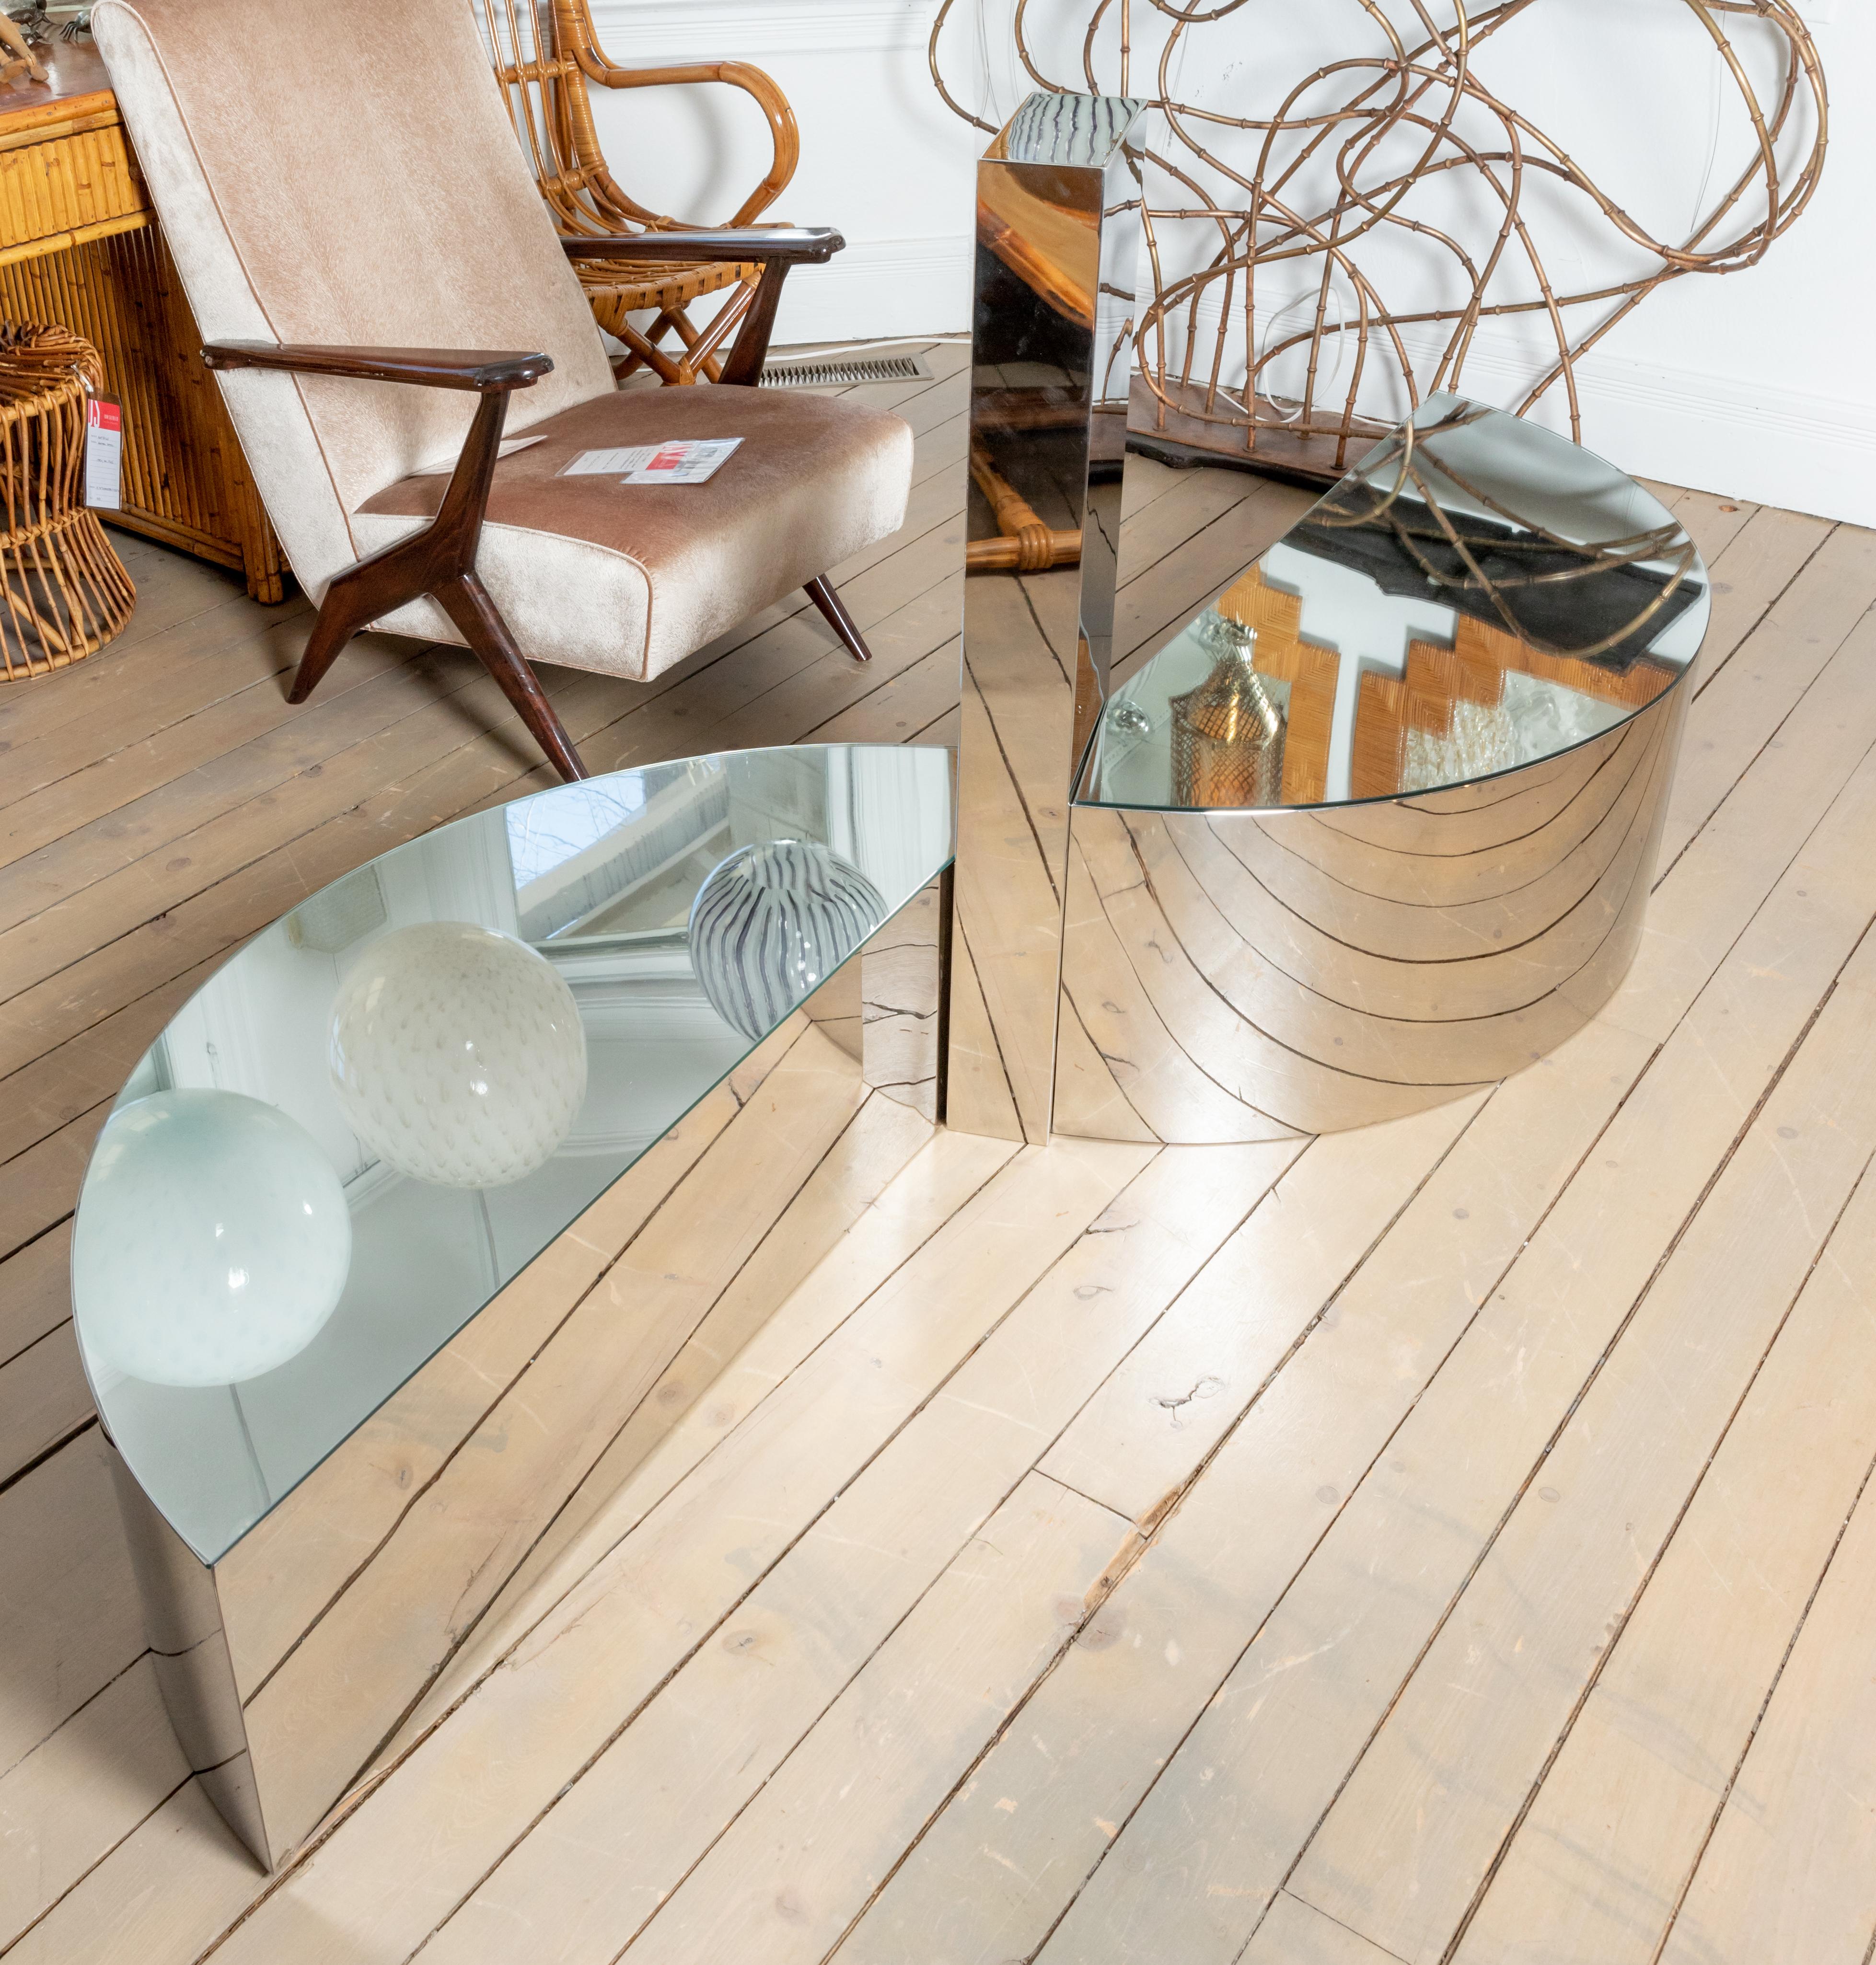 Unusual three section freeform stainless steel coffee table with glass tops.